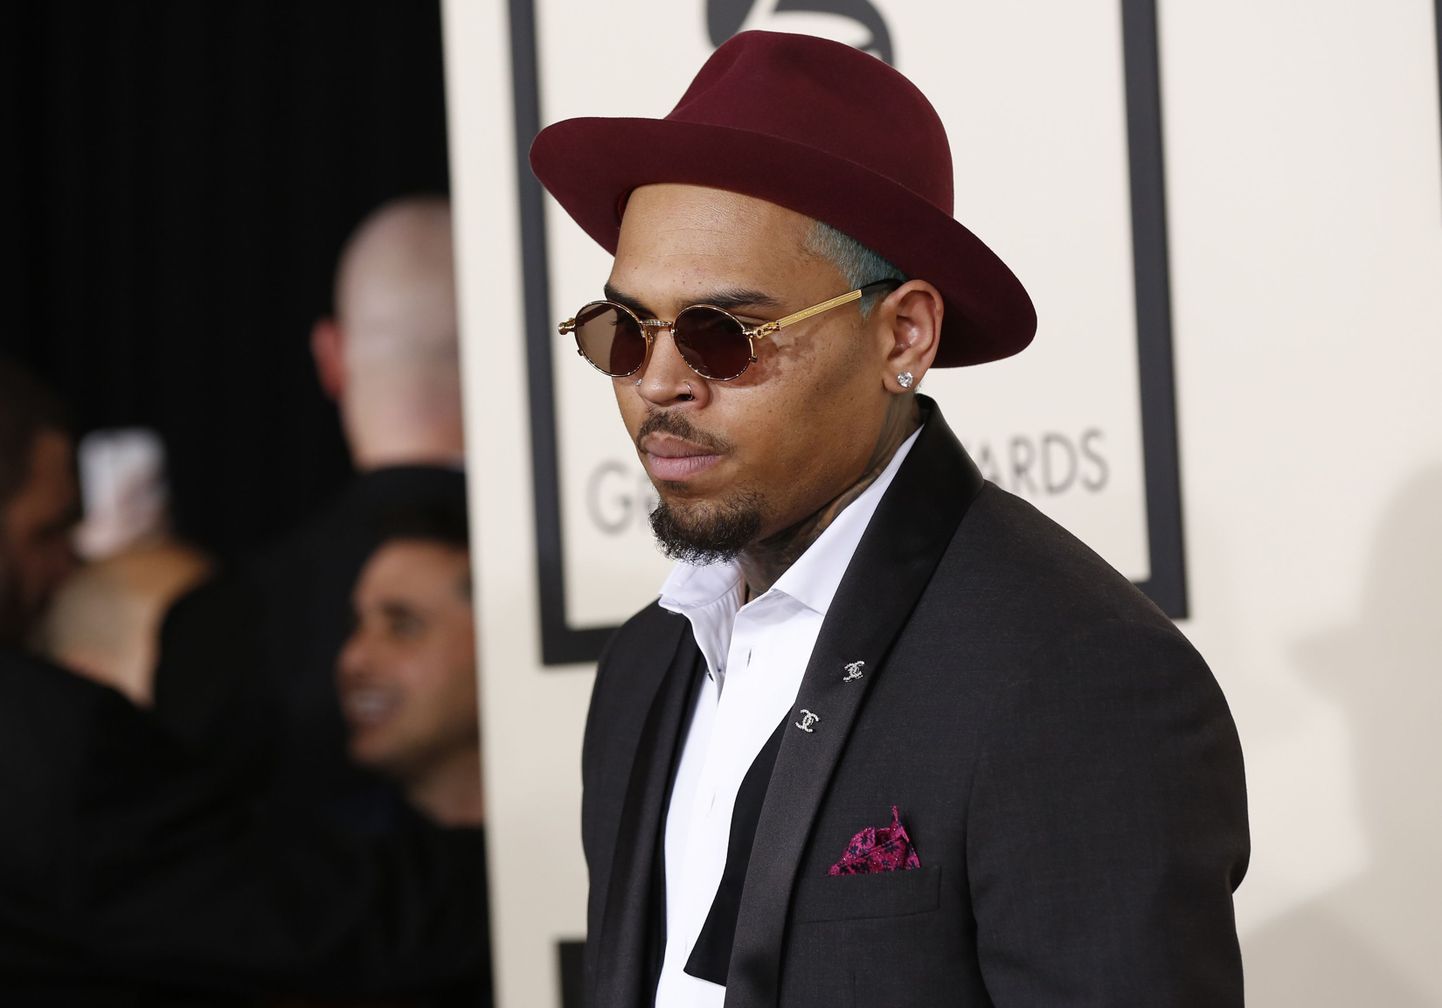 Singer Chris Brown arrives at the 57th annual Grammy Awards in Los Angeles, California February 8, 2015.   REUTERS/Mario Anzuoni (UNITED STATES  - Tags: ENTERTAINMENT)  (GRAMMYS-ARRIVALS)